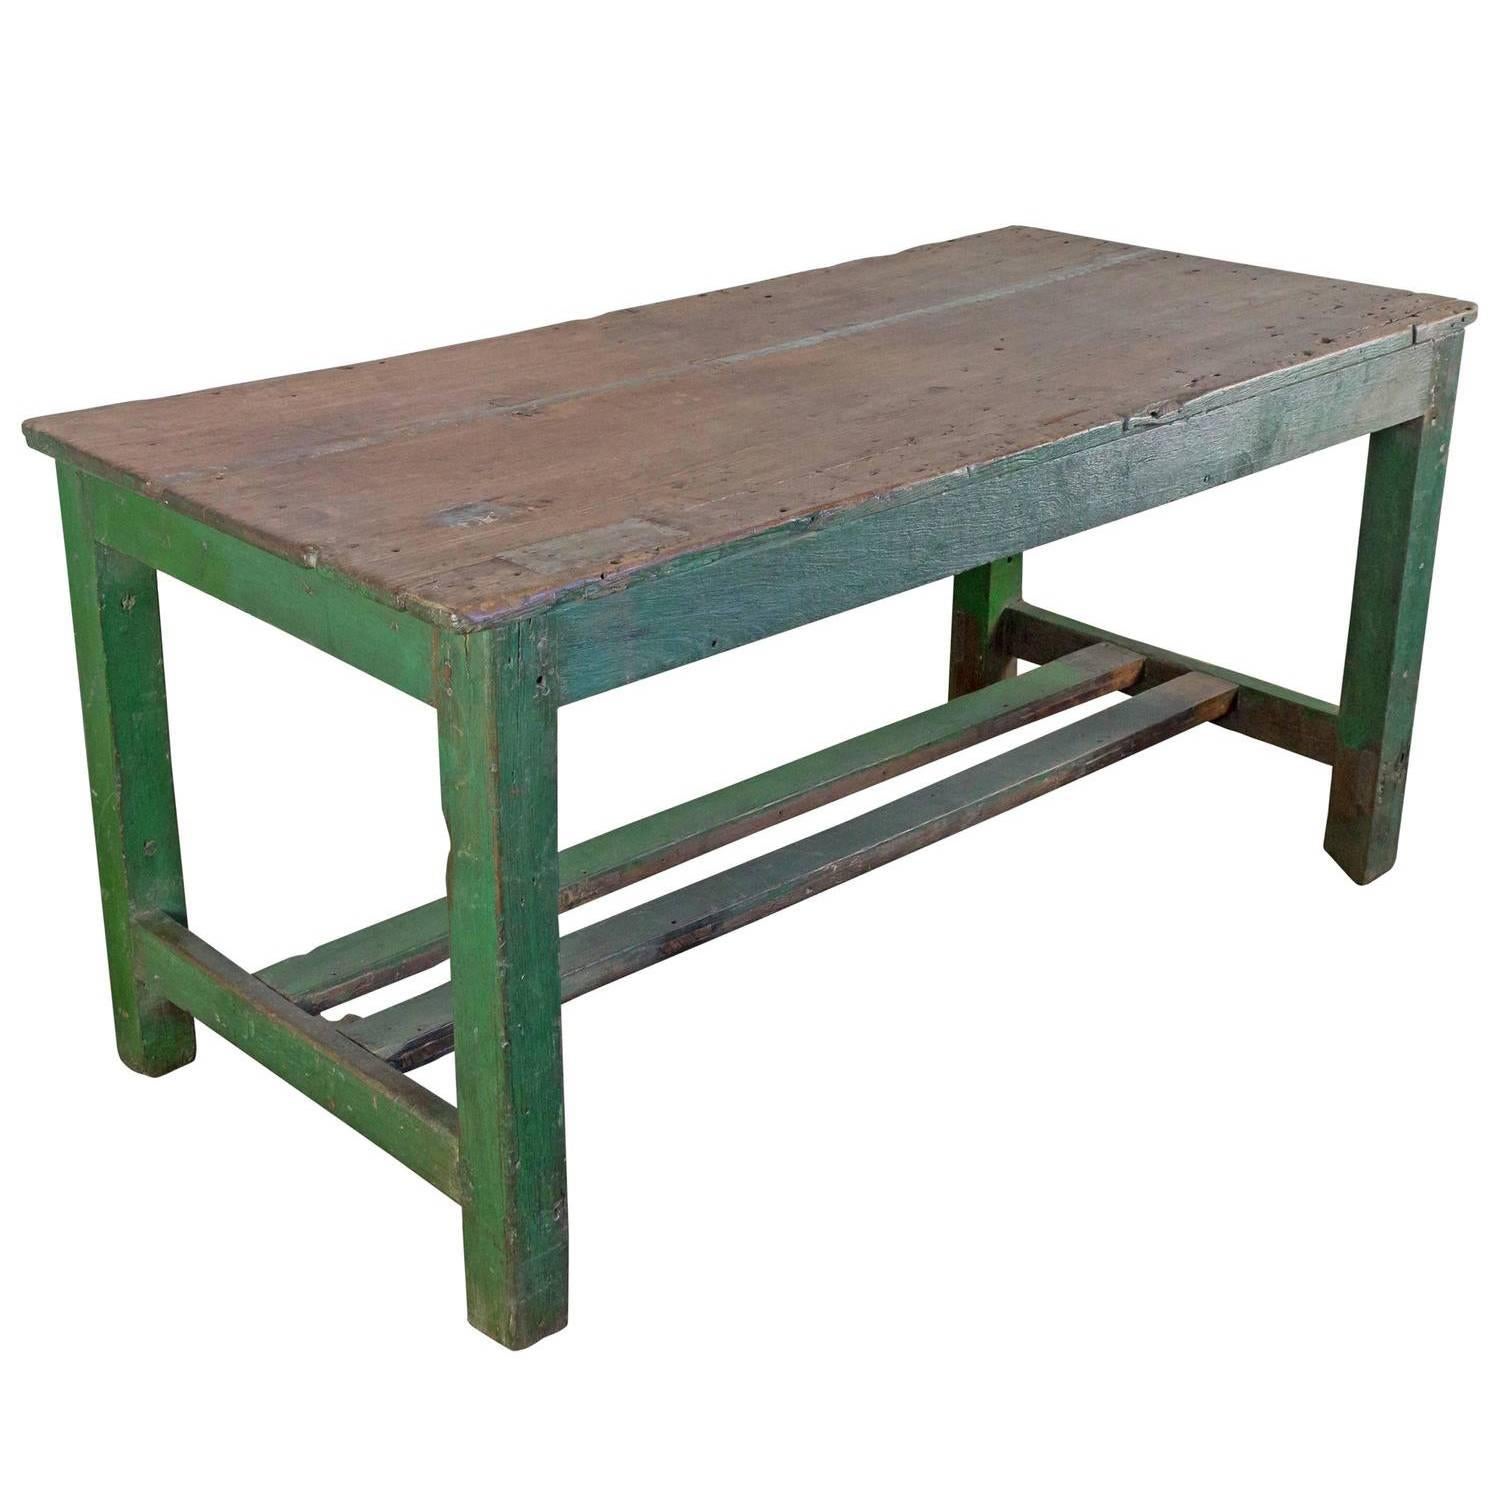 Large French Industrial Wooden Table with Painted Green Base